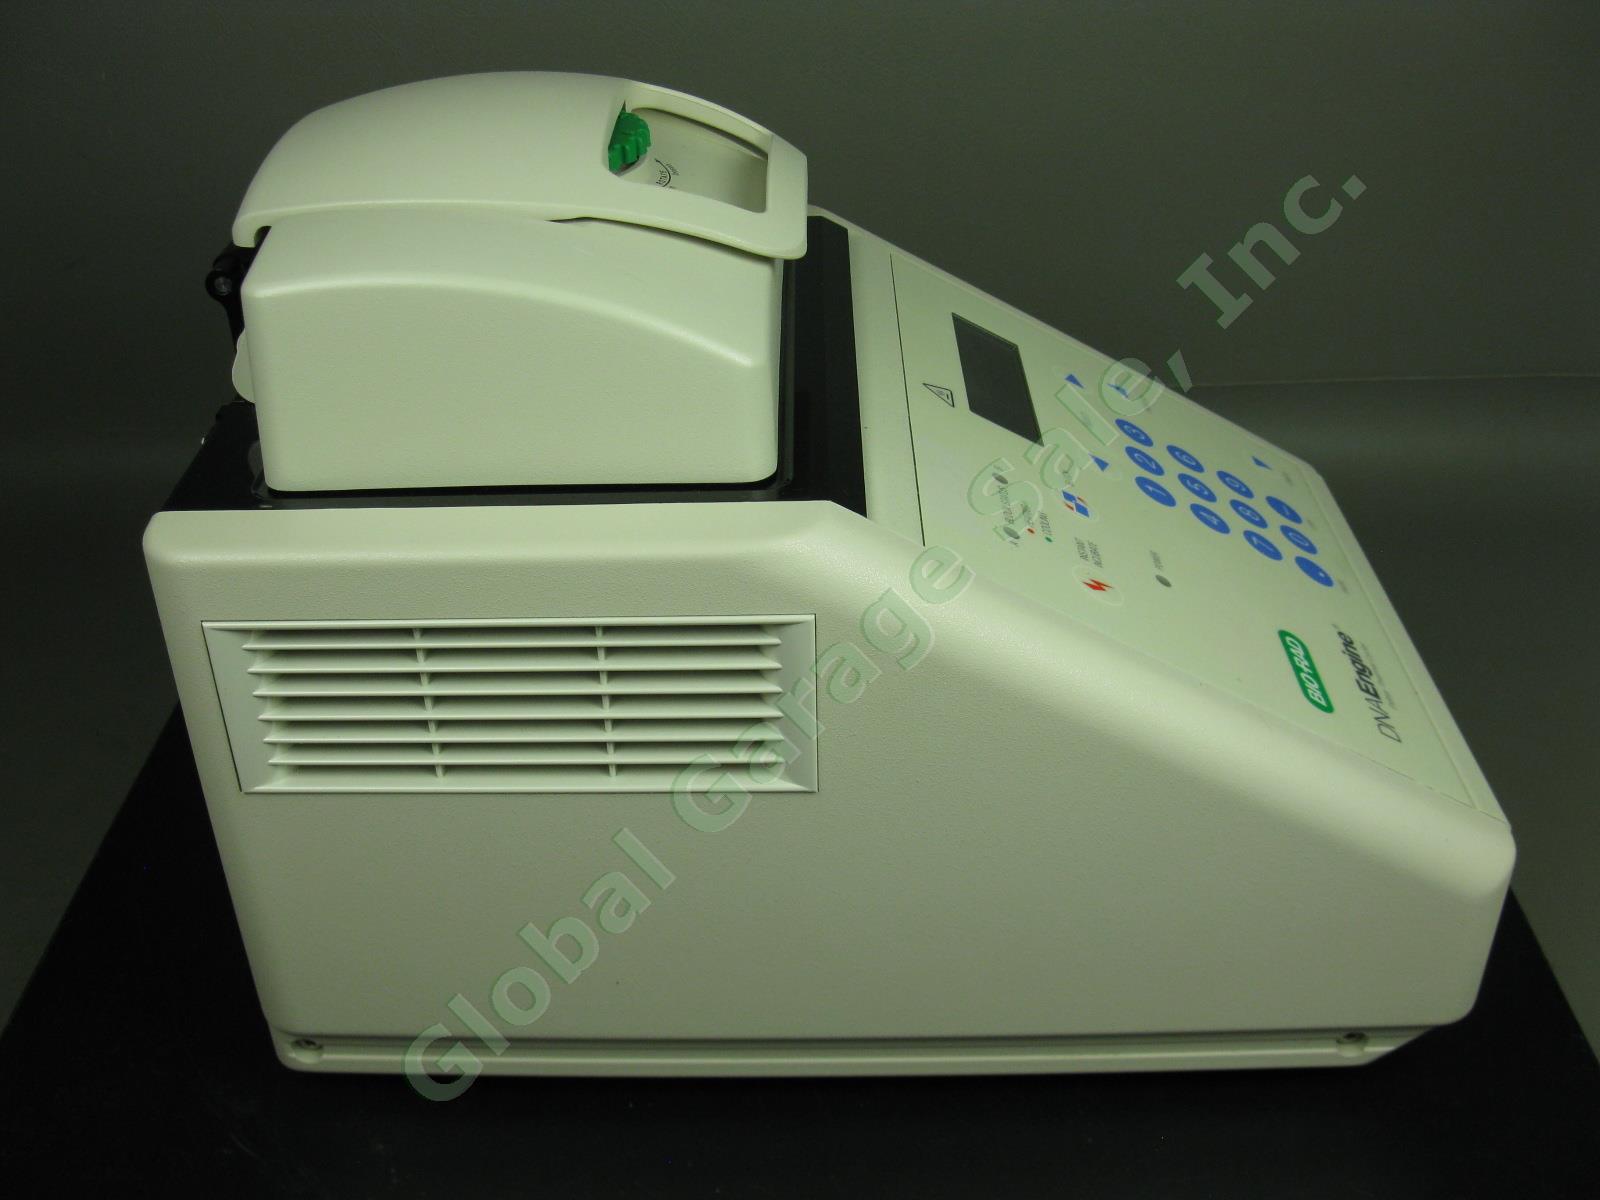 BioRad DNA Engine PTC 200 Peltier Thermal Cycler W/ 96 Well Block Tested As-Is 4